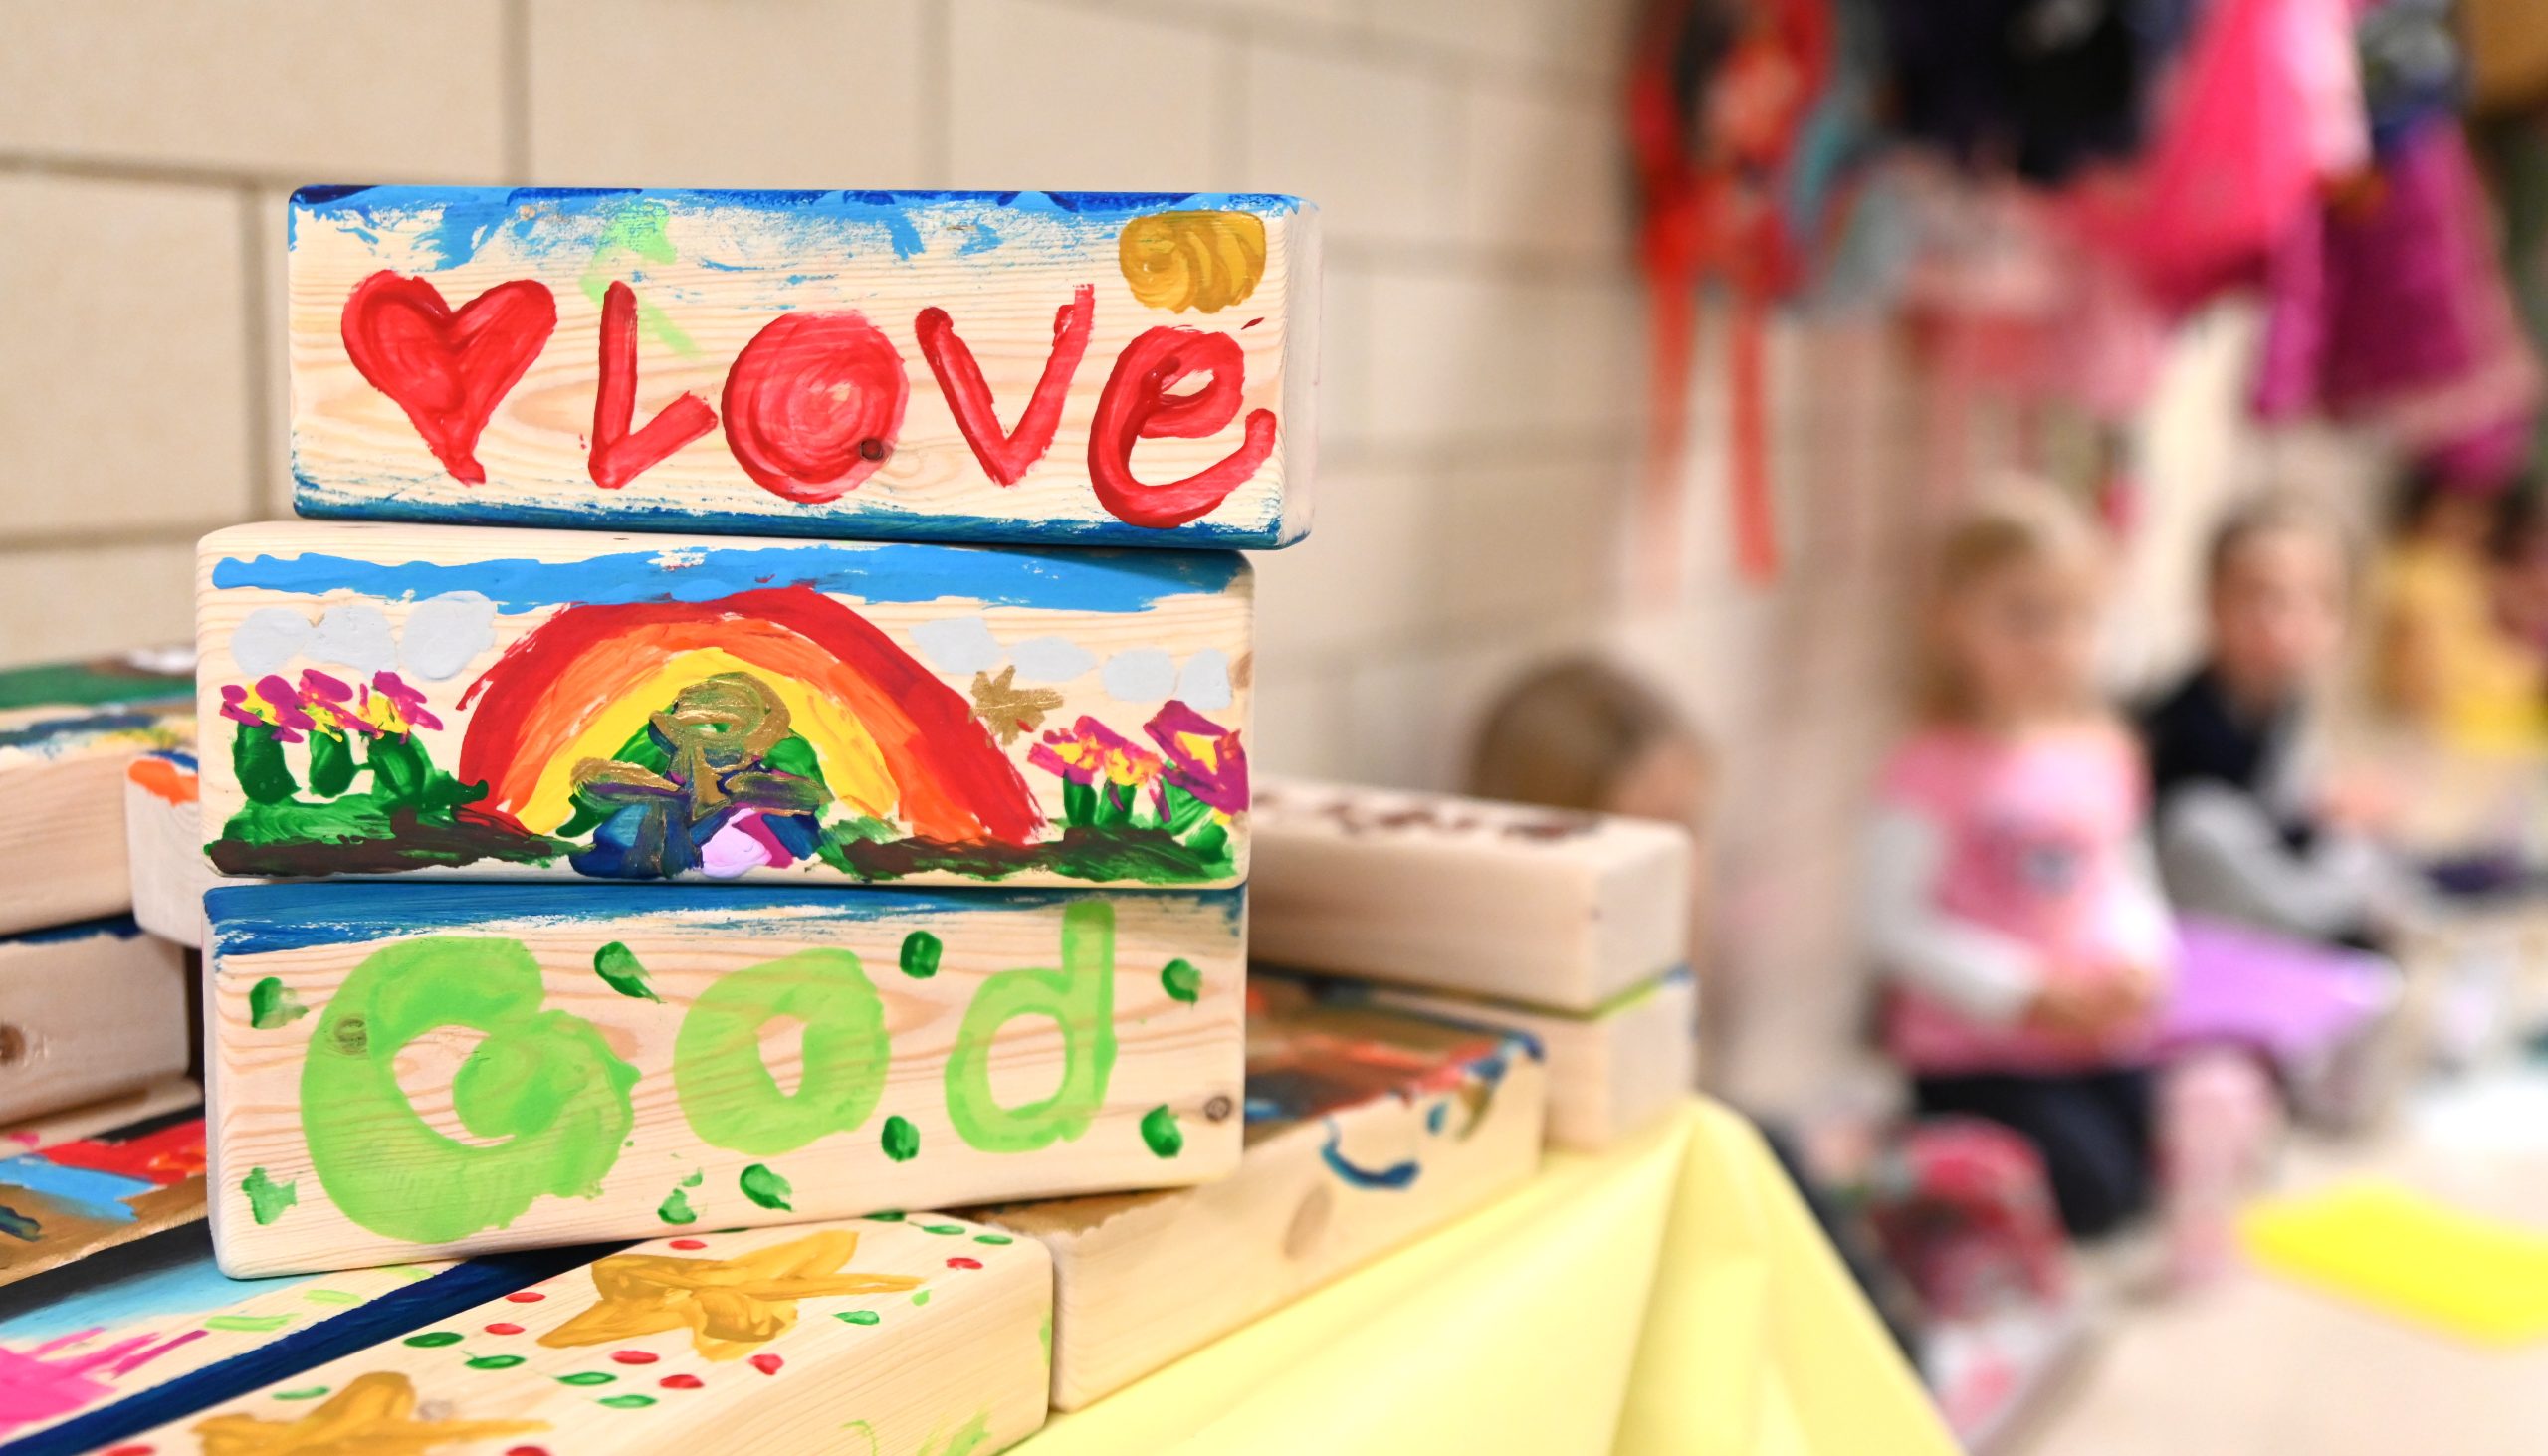 Wooden blocks painted with the words Love, God, and a rainbow scene.